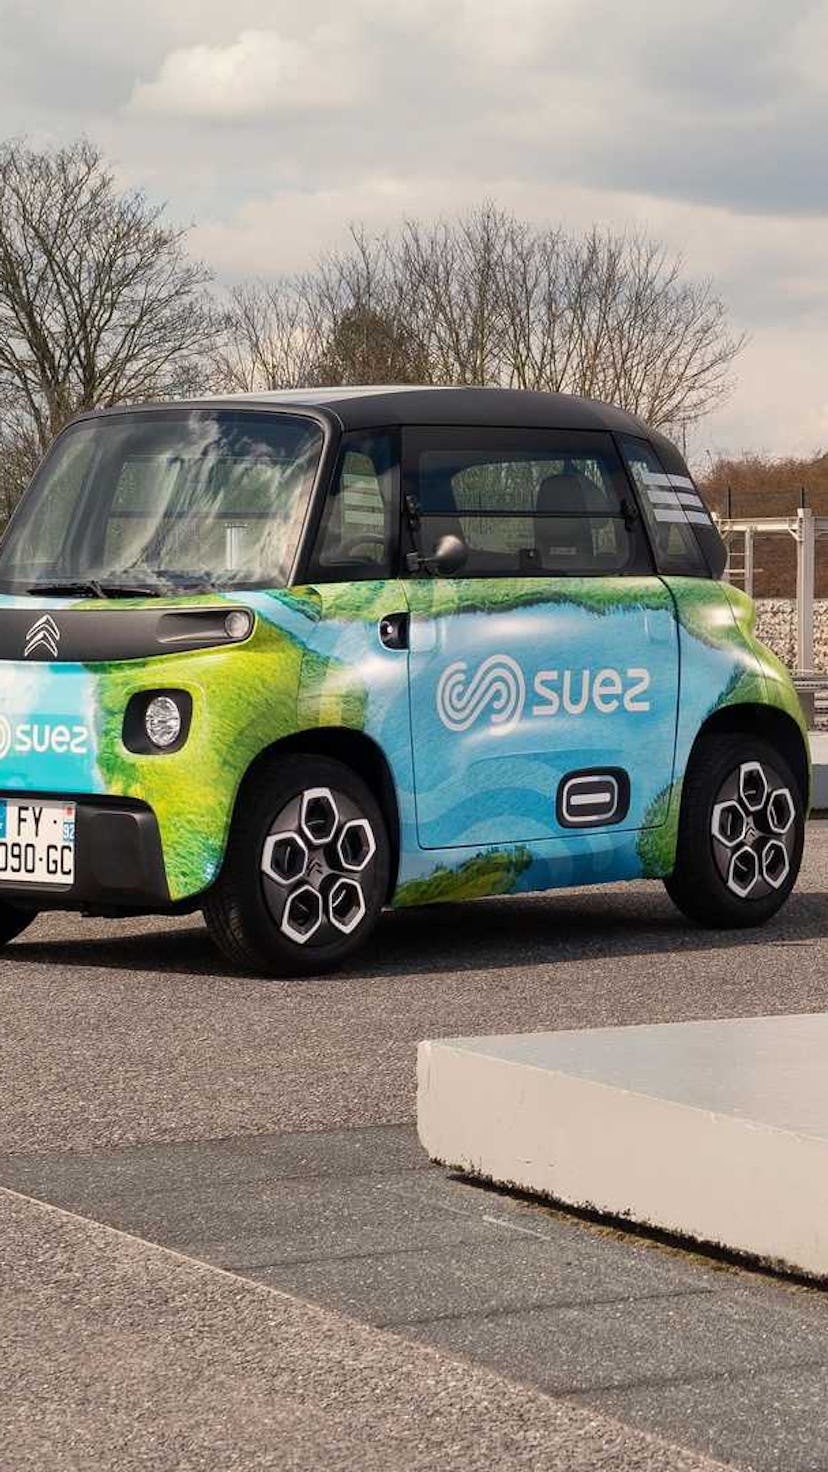 Citroën has unveiled a cargo-ready version of its small AMI electric car.